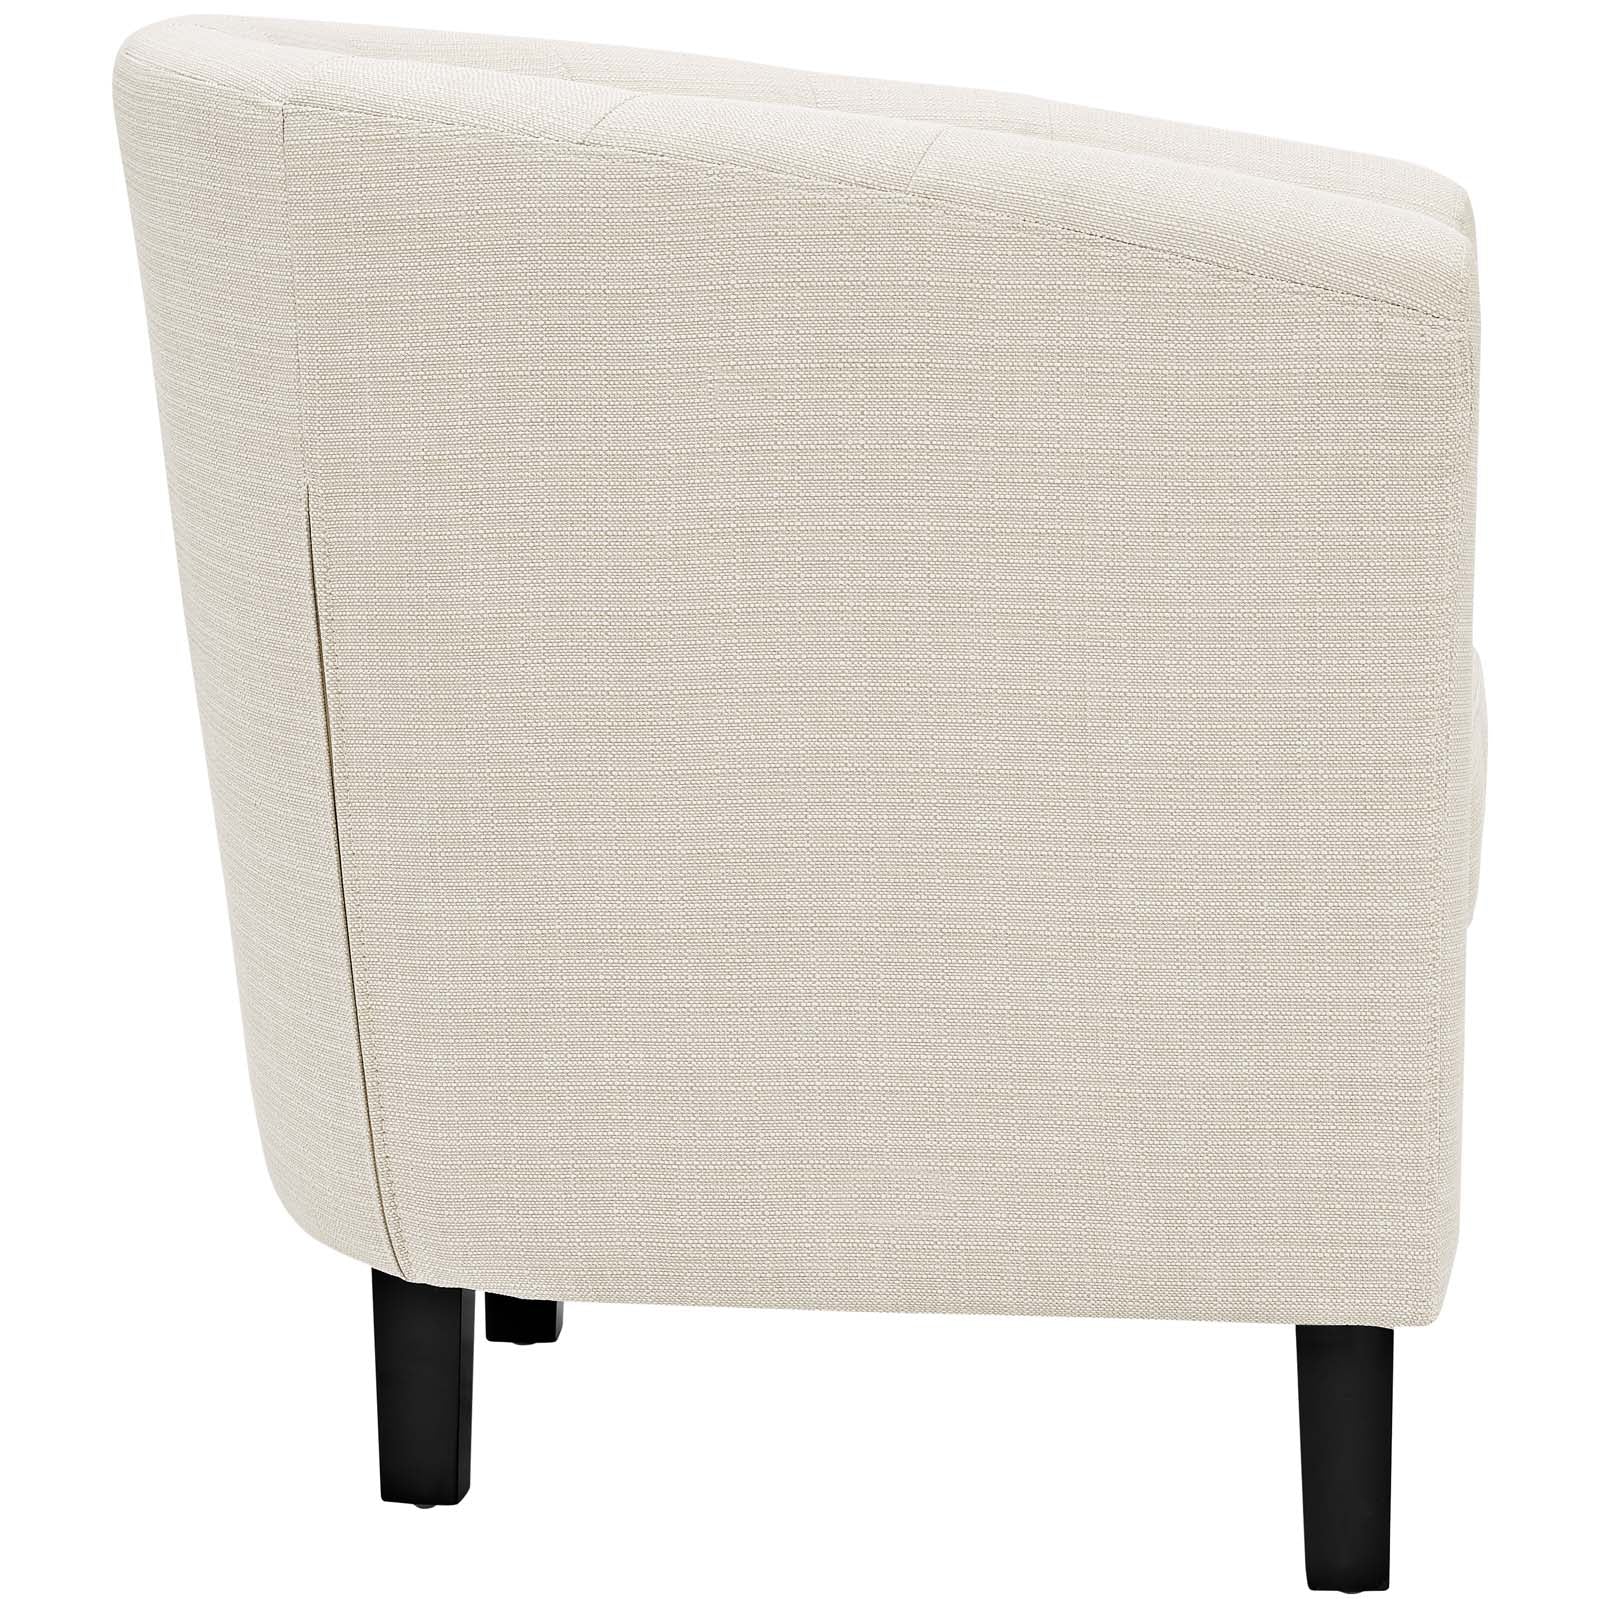 Modway Chairs - Prospect Upholstered Fabric Armchair Beige